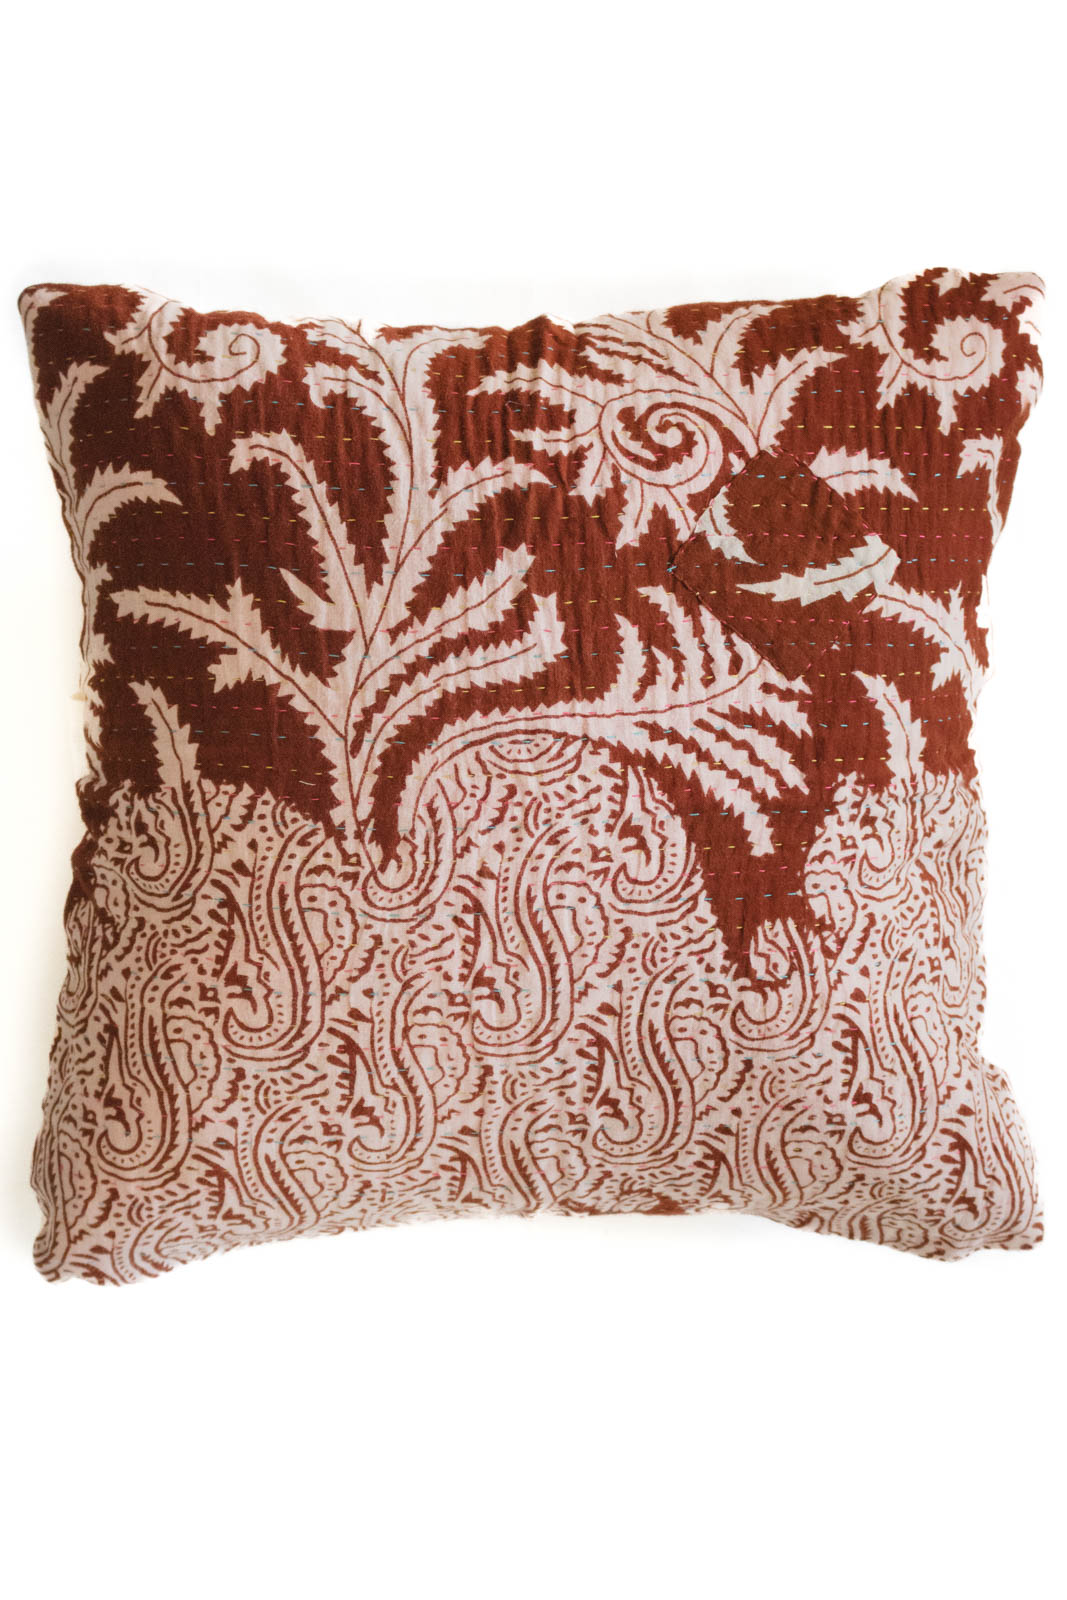 Fearless no. 9 Kantha Pillow Cover